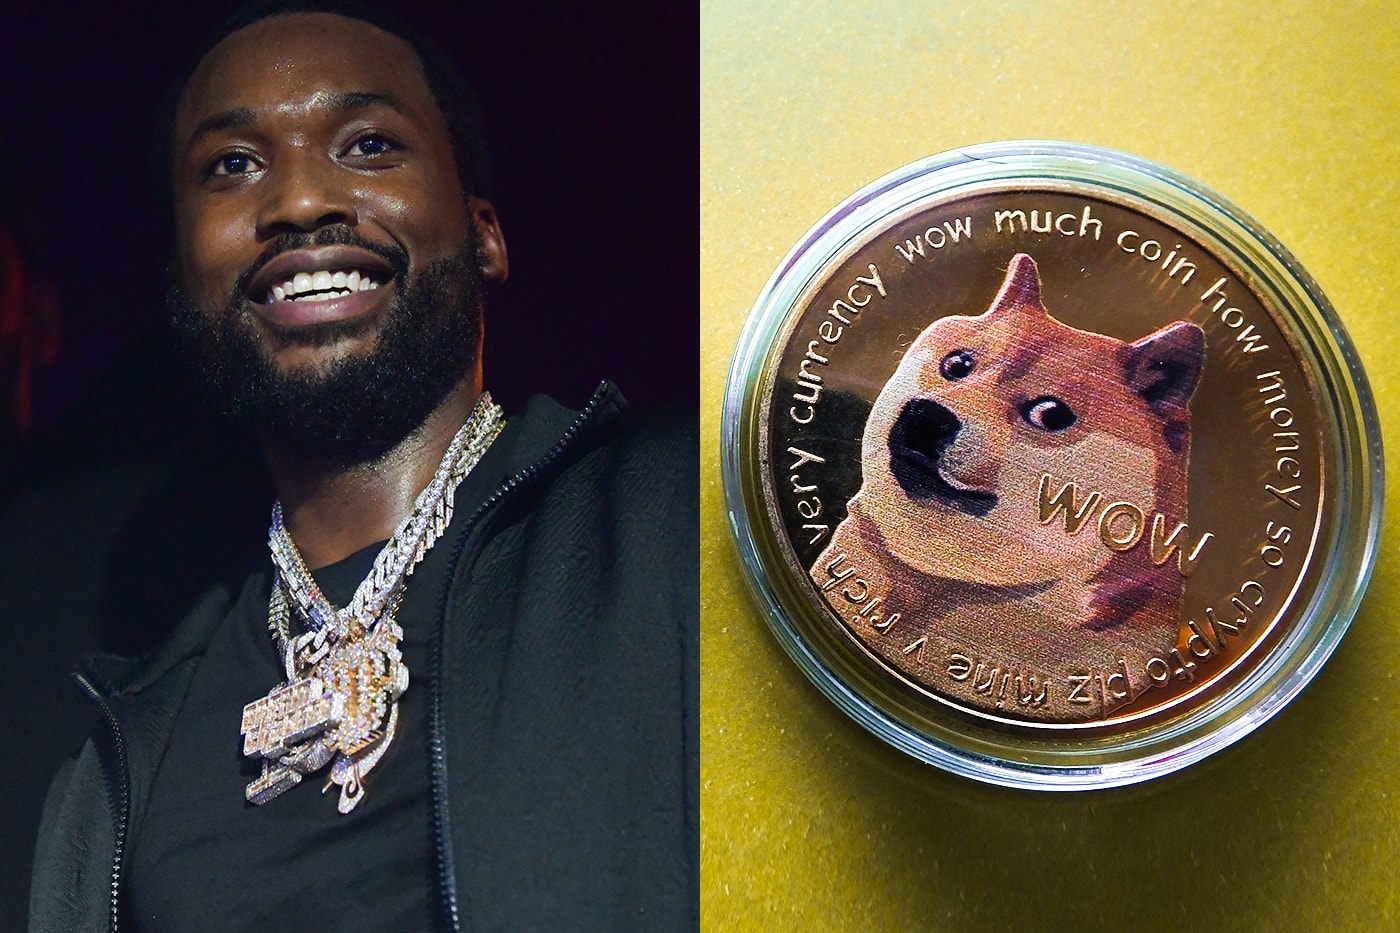 meek mill doge coin 50k purchase nes ethereum xrp ripple meme coin cryptocurrency alts blockchain rap hip-hop investing 